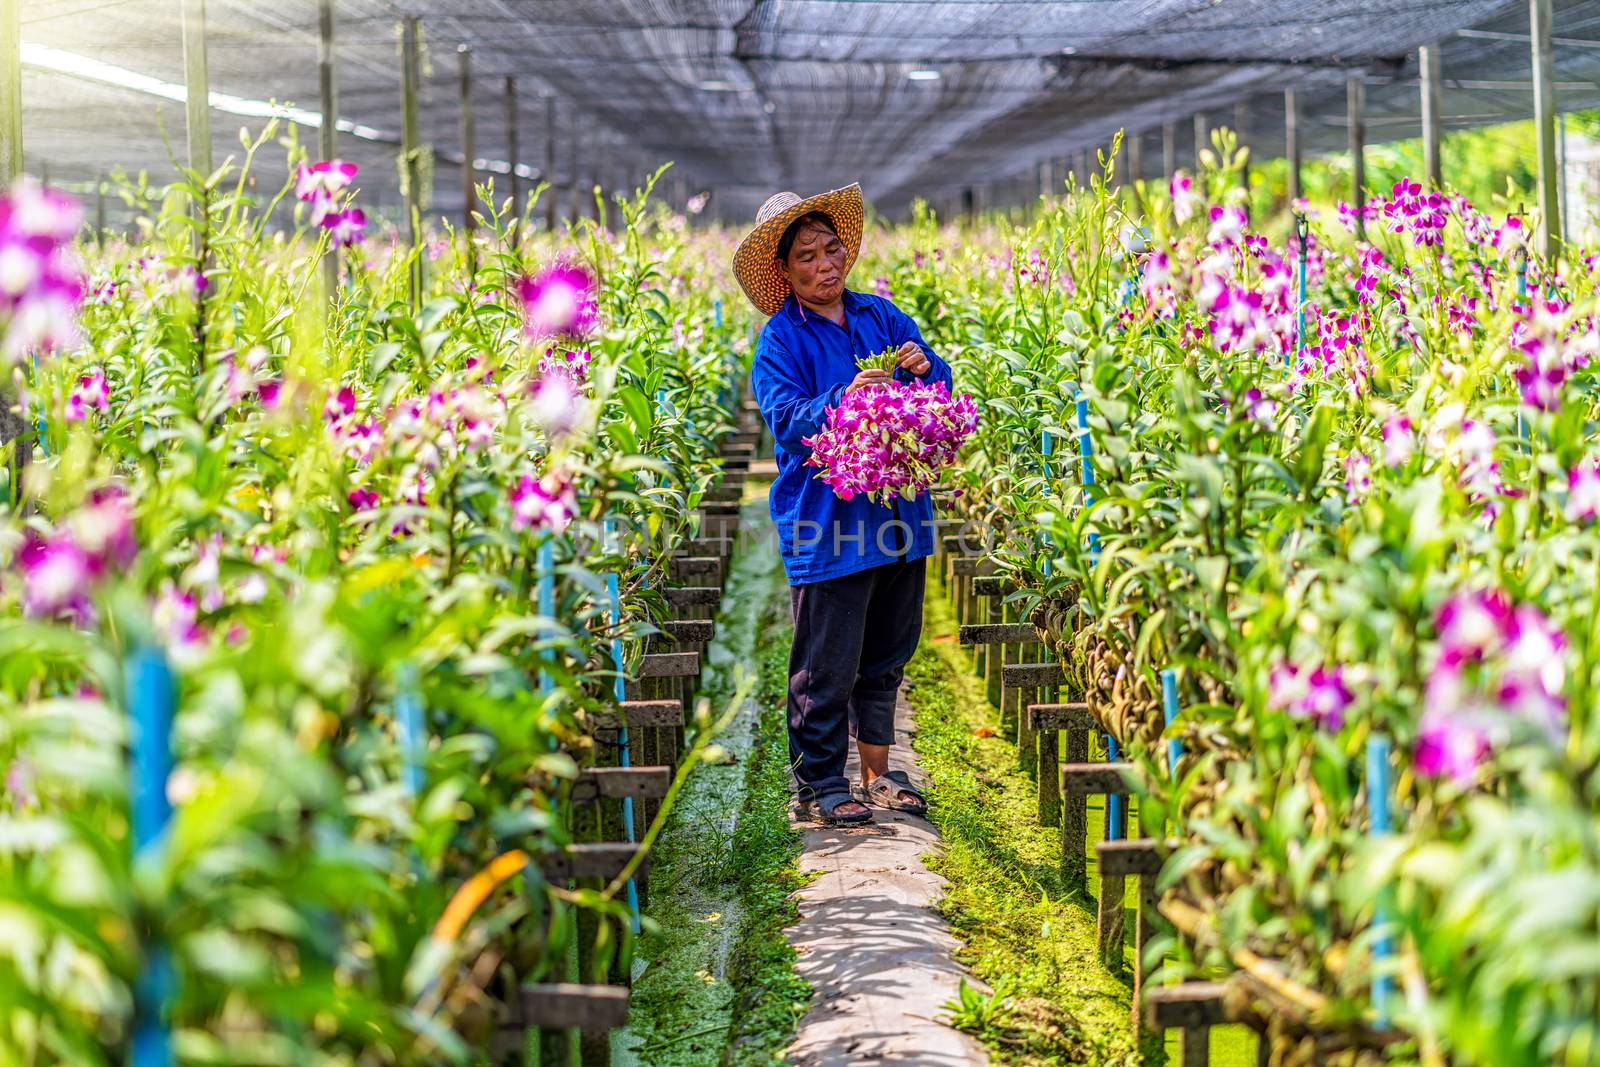 Asian gardener of orchid gardening farm cutting and collection the orchids, The purple colors are blooming in the garden farm, Purple orchids in farming of bangkok, thailand.